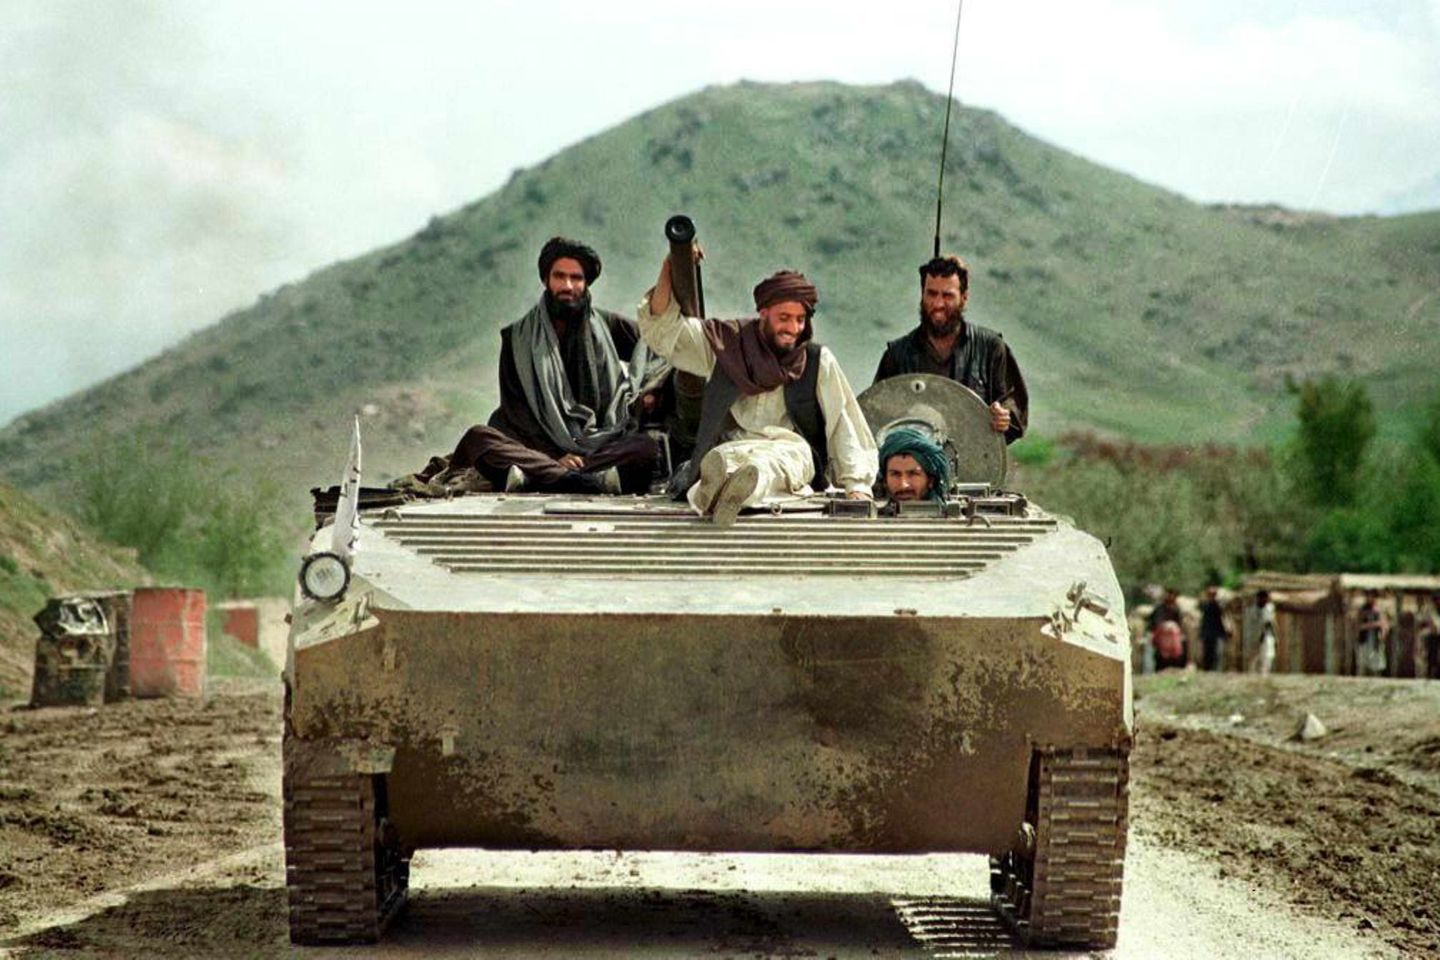 (Archiv) A 26 April 1998 file photo shows Taliban fighters riding on a Soviet-made light tank towards a front line position in Hossein Kot, 25km north of the Afghan capital Kabul. The Taliban militia closed in on the Afghan opposition capital of Mazar-i-Sharif 04 August after a spectacular breakthrough in the north of the country. dpa COLOR